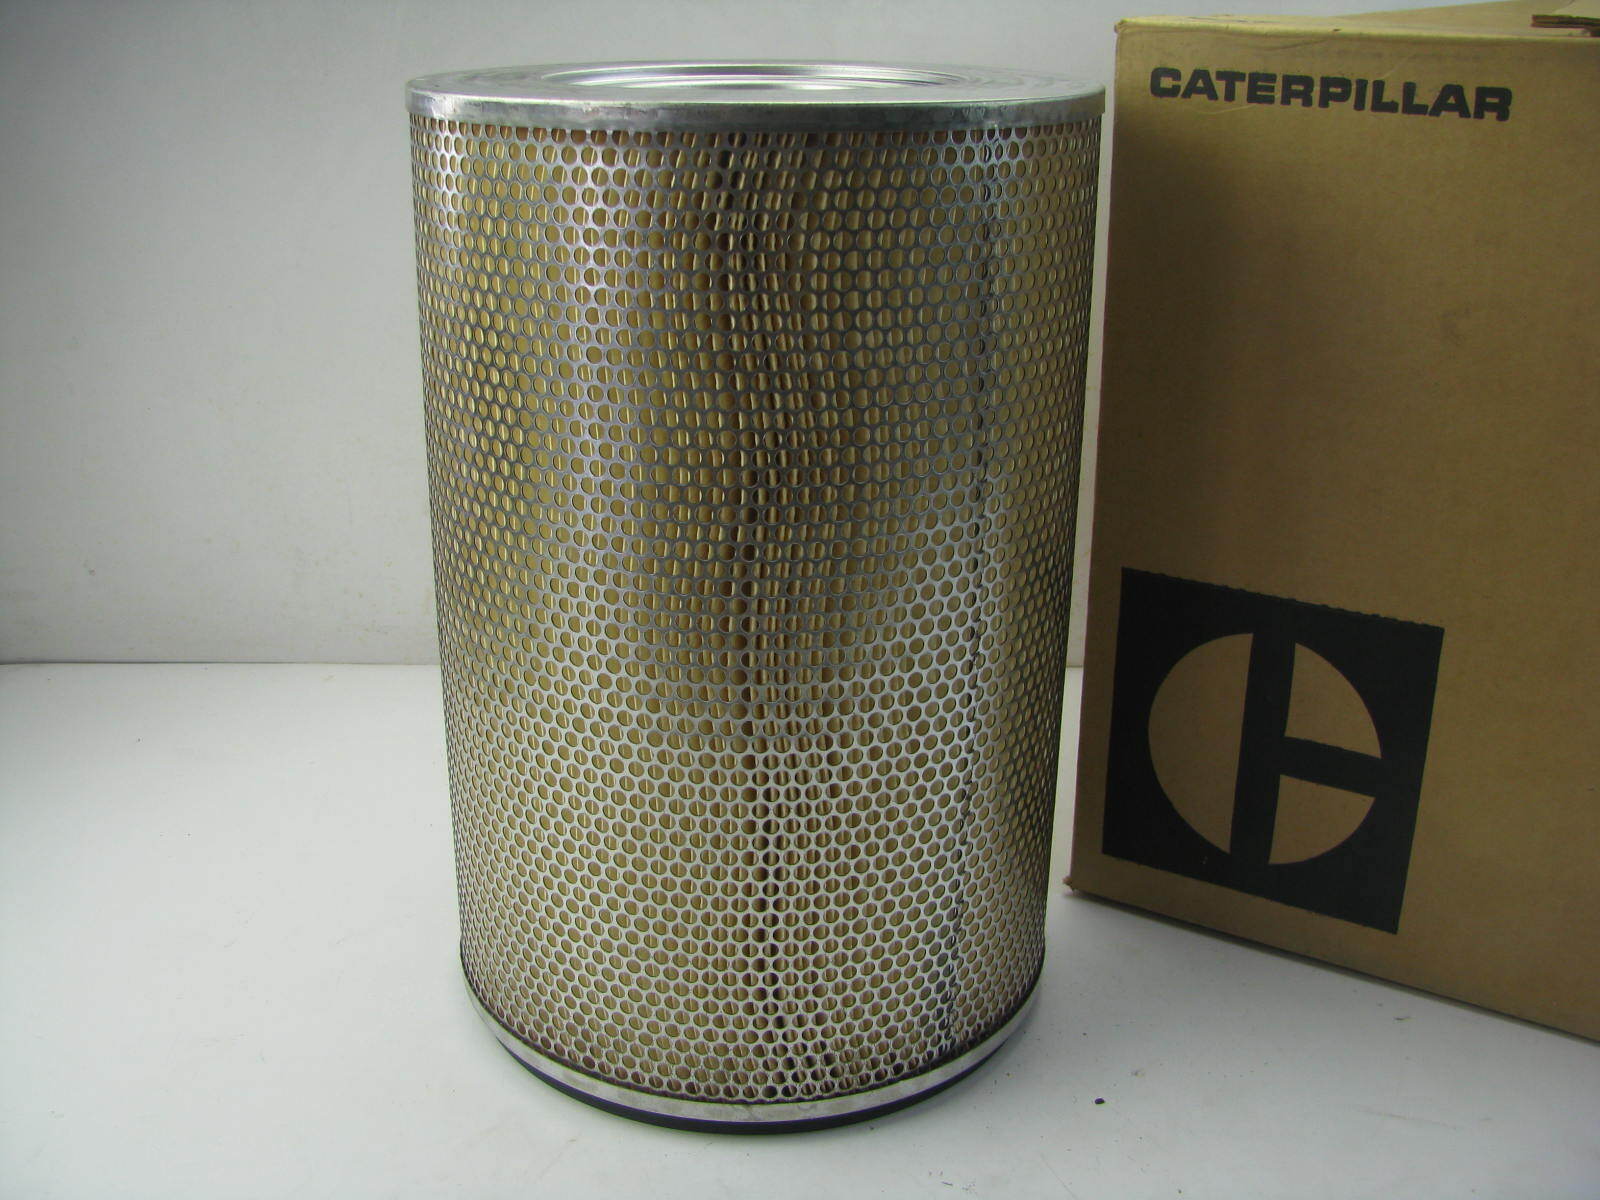 NEW - OEM 7M9045 Air Filter (Replaces Wix 42045) For CAT